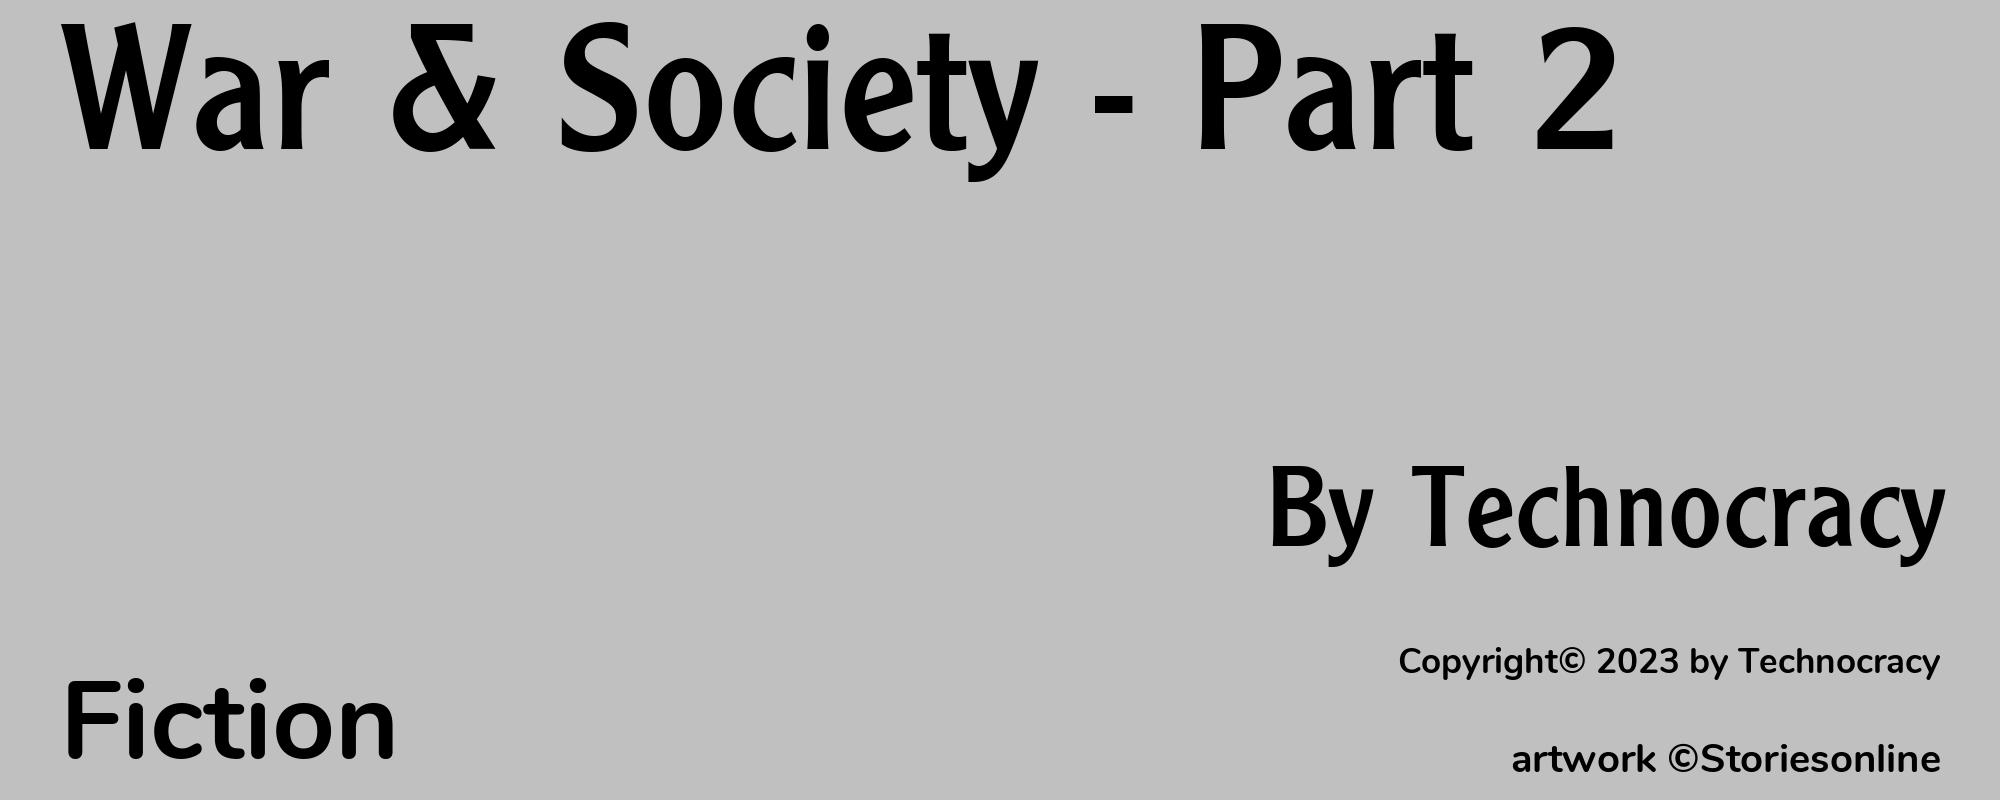 War & Society - Part 2 - Cover